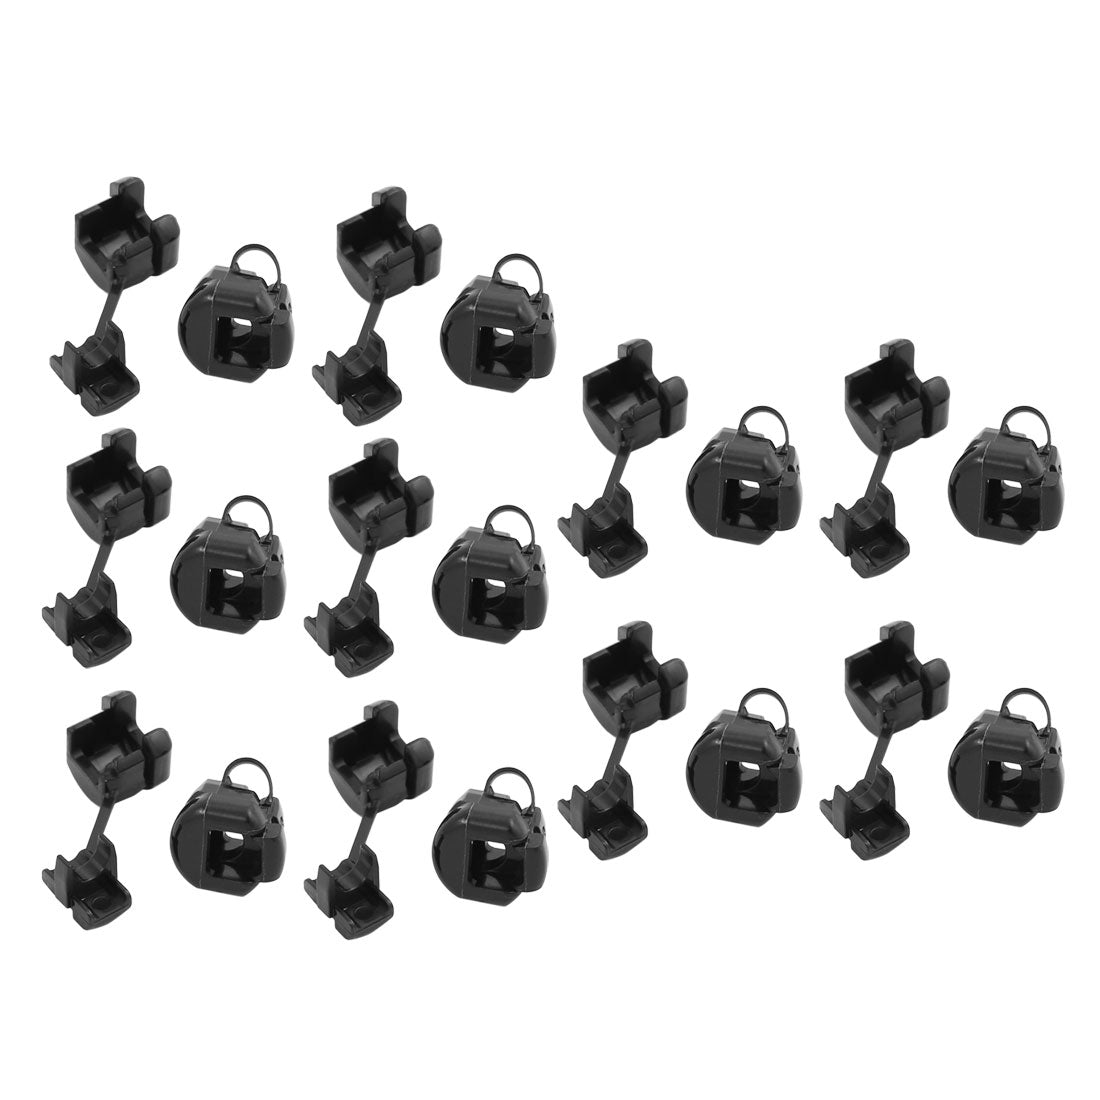 uxcell Uxcell 20Pcs 5N-4 Round Cable Wire Strain Relief Bush Grommet 11mm Diameter Black